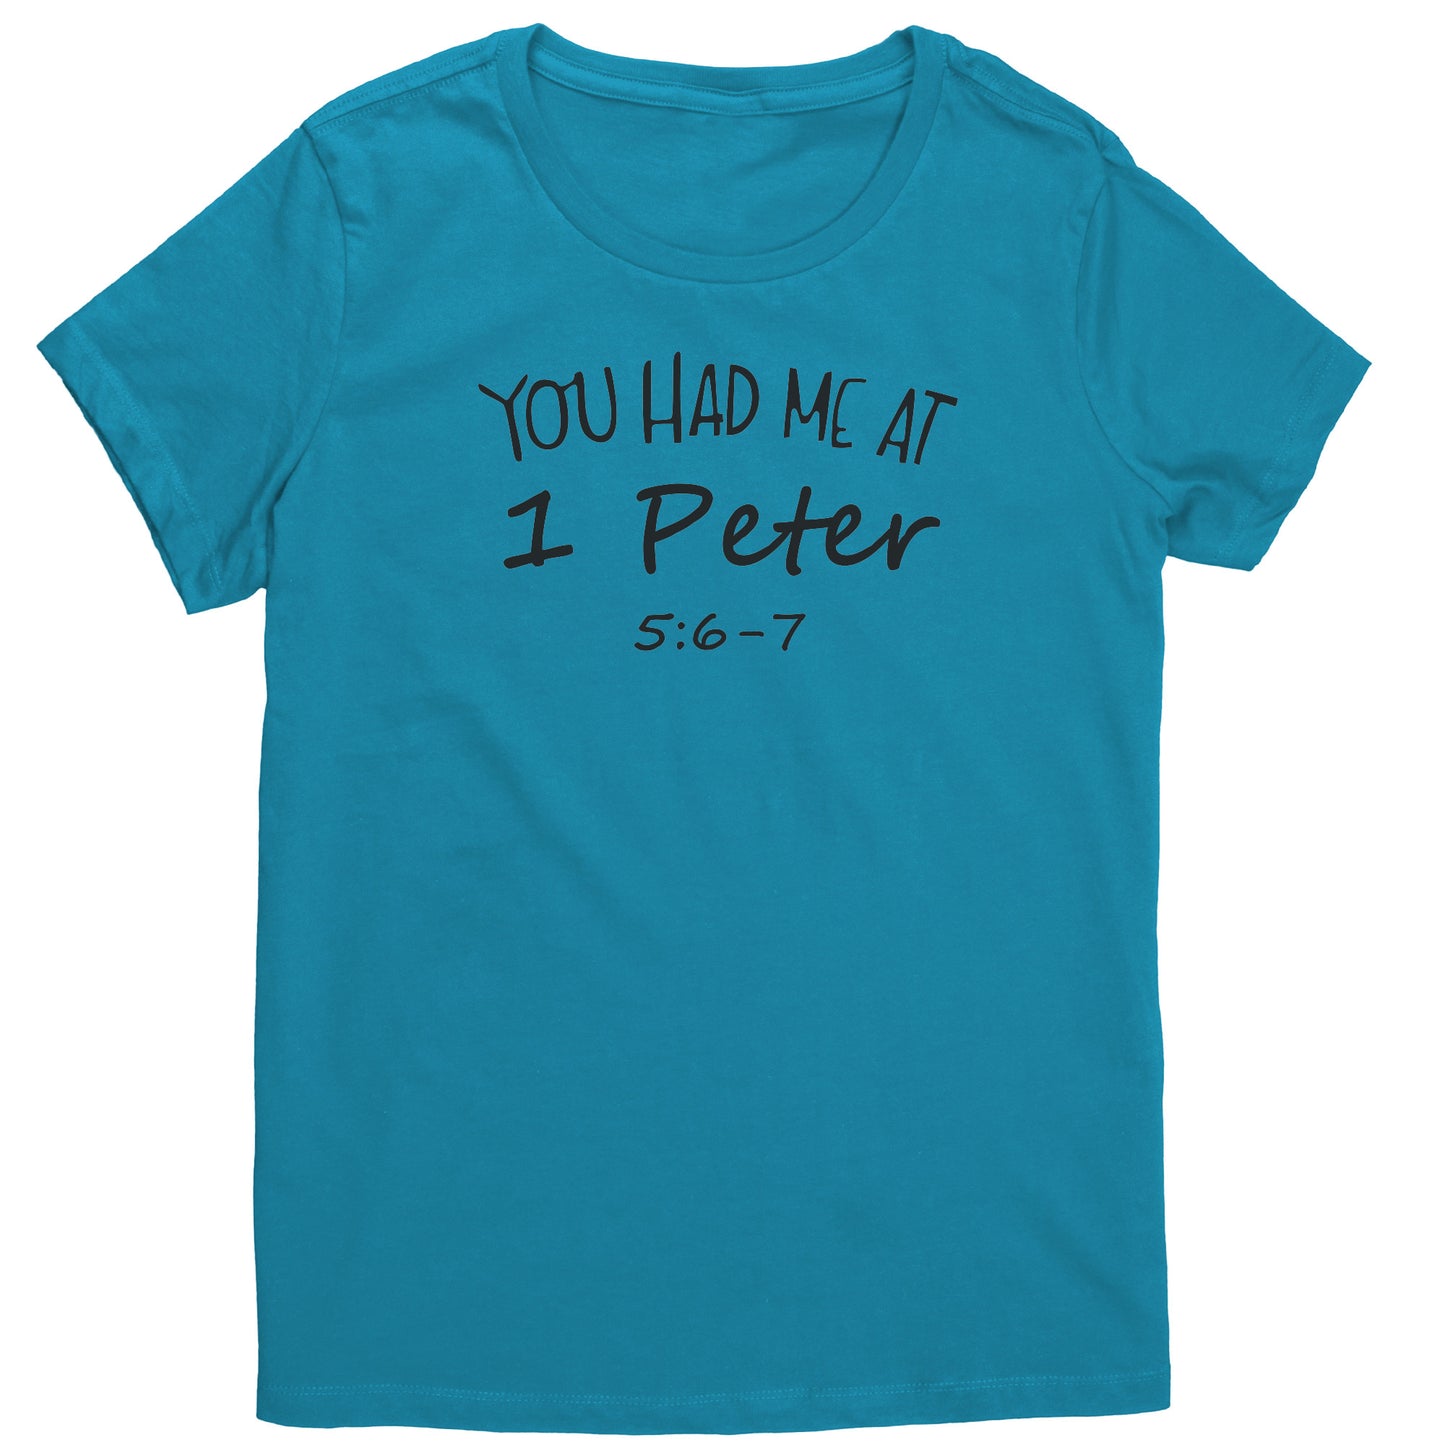 You Had Me At 1 Peter 5:6-7 Women's T-Shirt Part 1